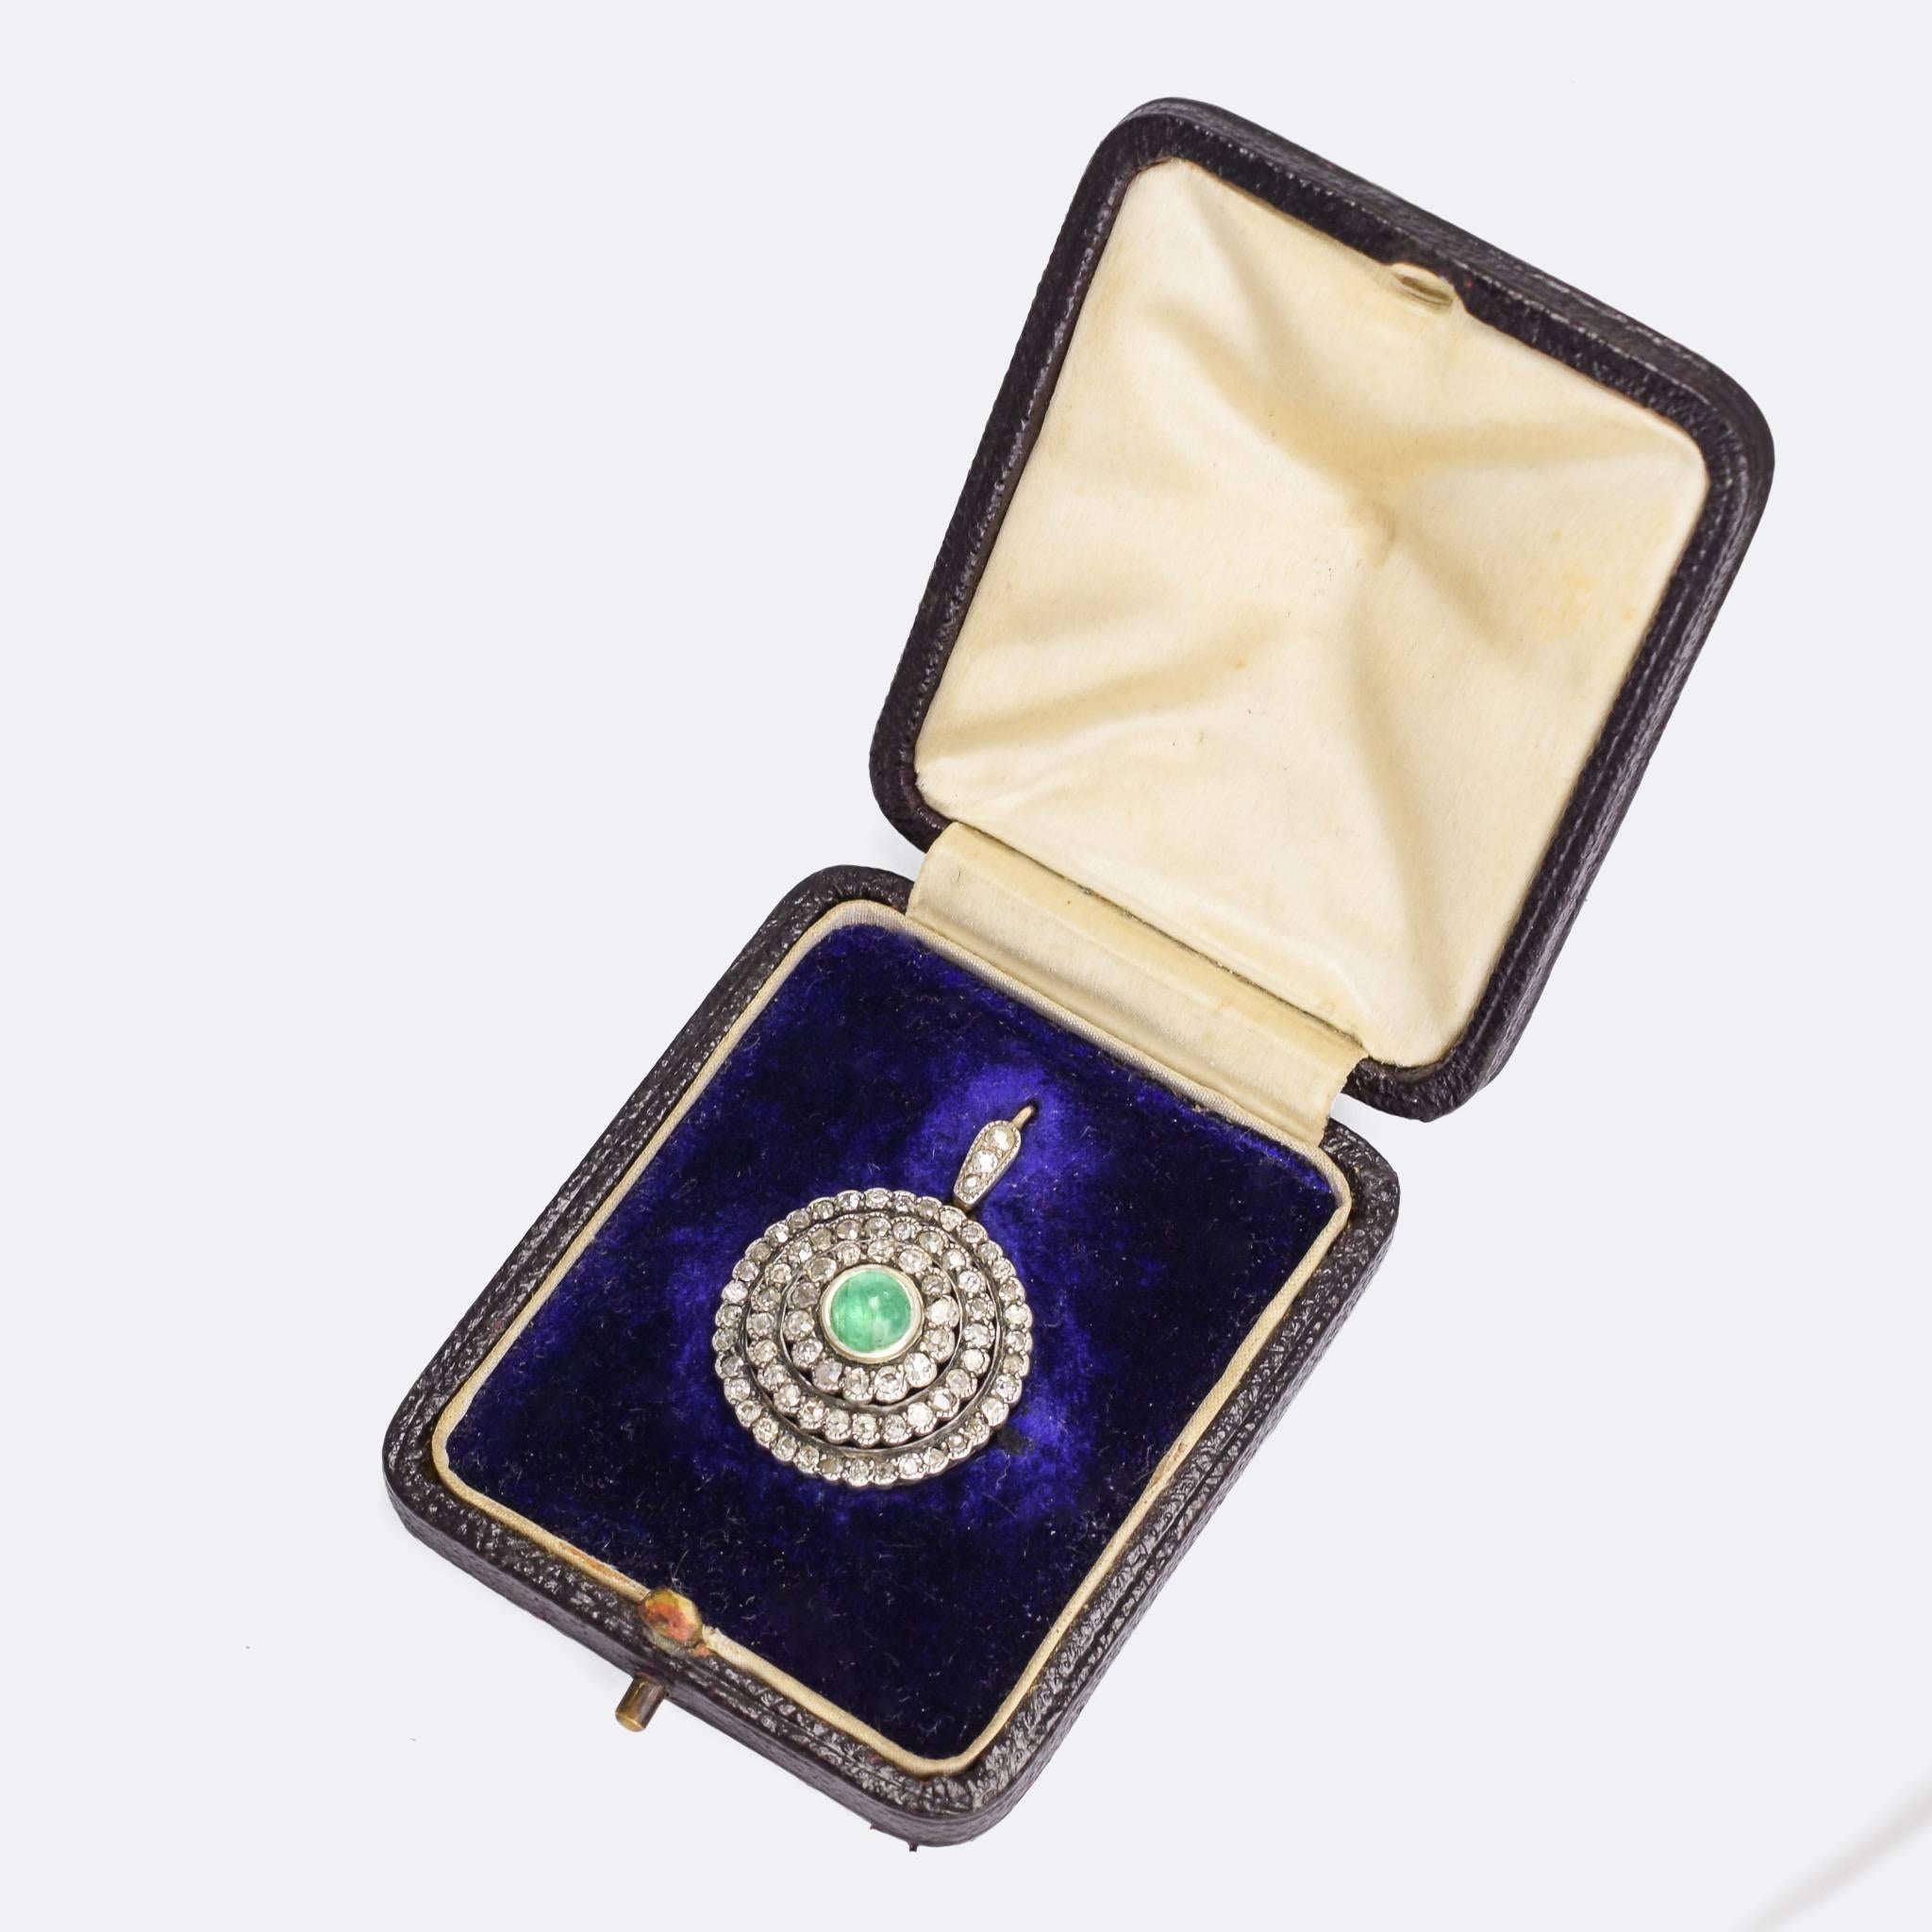 A fine quality diamond cluster pendant, three rows of old cut diamonds surround a natural emerald cabochon. Set in 15k gold with silver settings. The piece comes in its original fitted box. There are also removable brooch fittings that attach to the